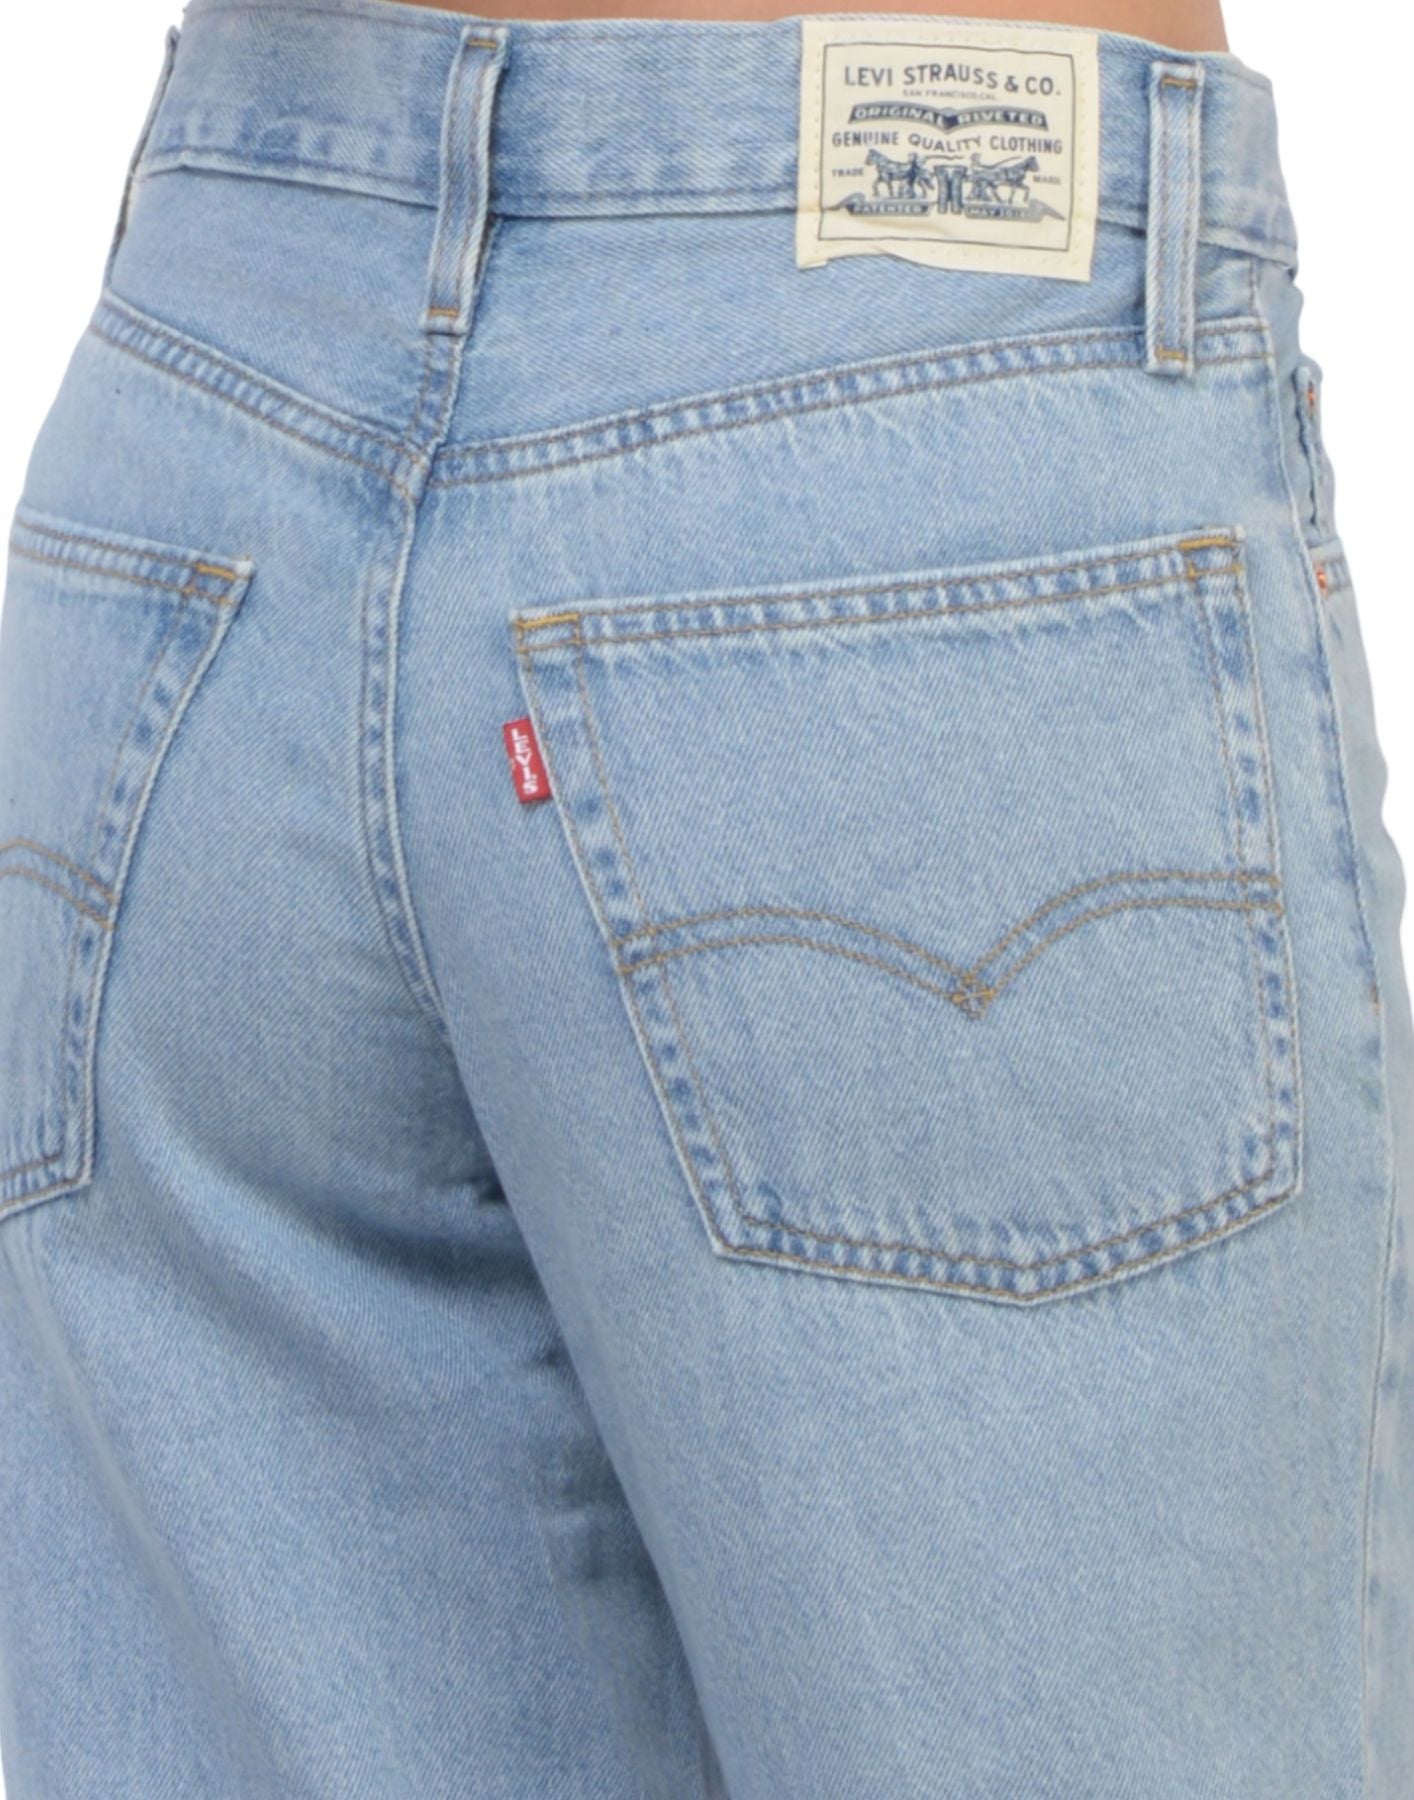 Jeans para mujer A34940033 Levi's